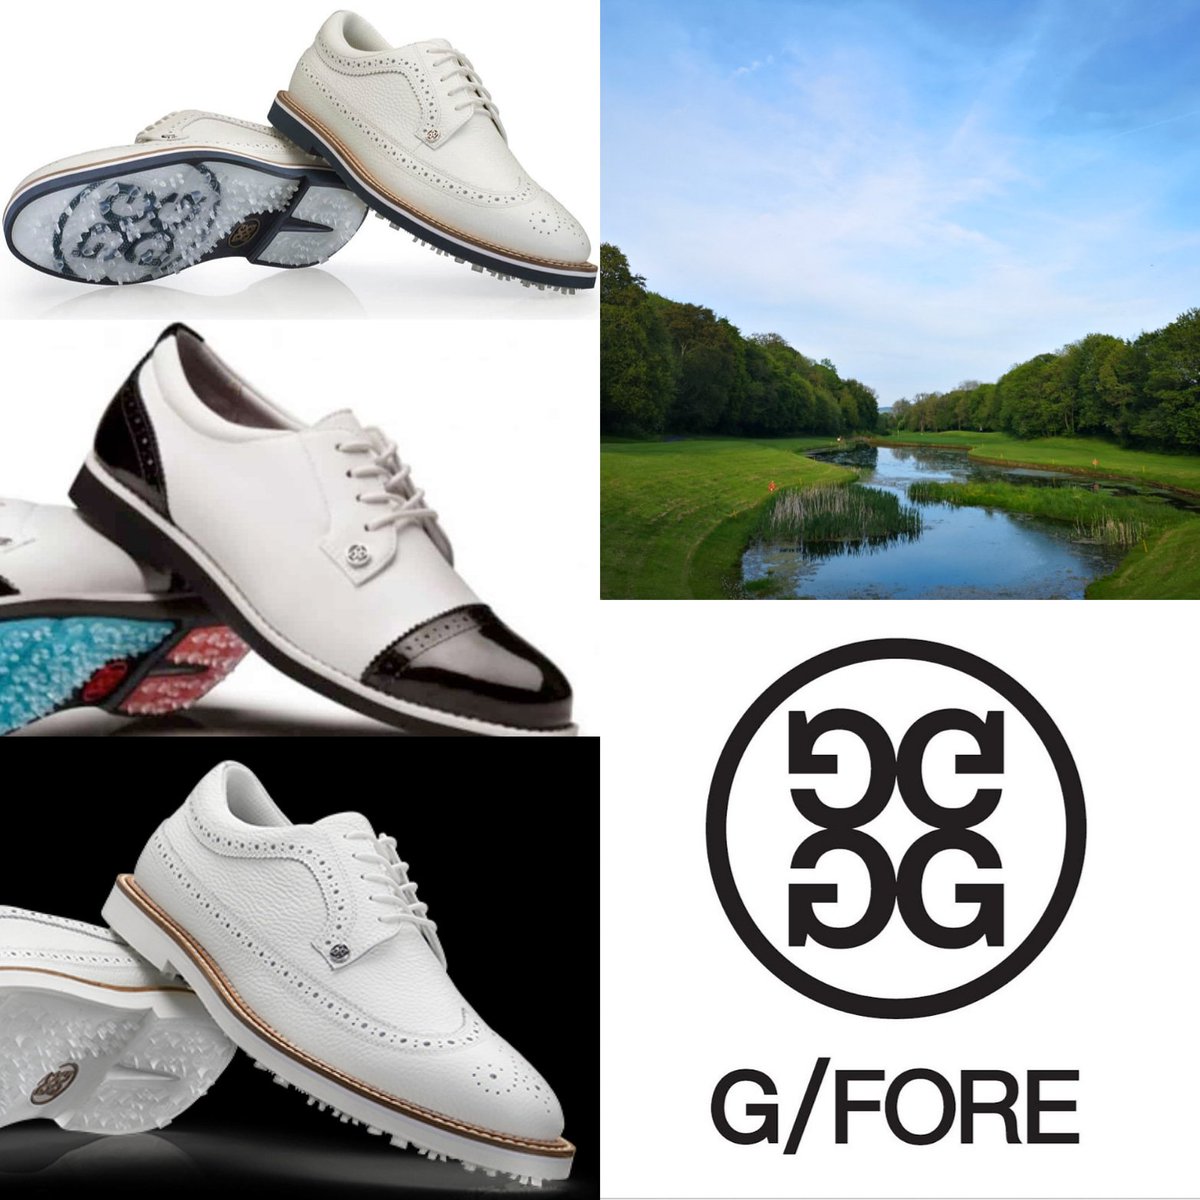 Open Singles at @mountjuliet Bank Holiday 3rd - 5th August! GFORE OPEN where you can win yourself a pair of the GFORE shoes as worn by @bubbawatson and @PhilMickelson! #Golf #MountJulietGolf #MountJulietEstate #GFORE #OpenGolf #OpenCompetition